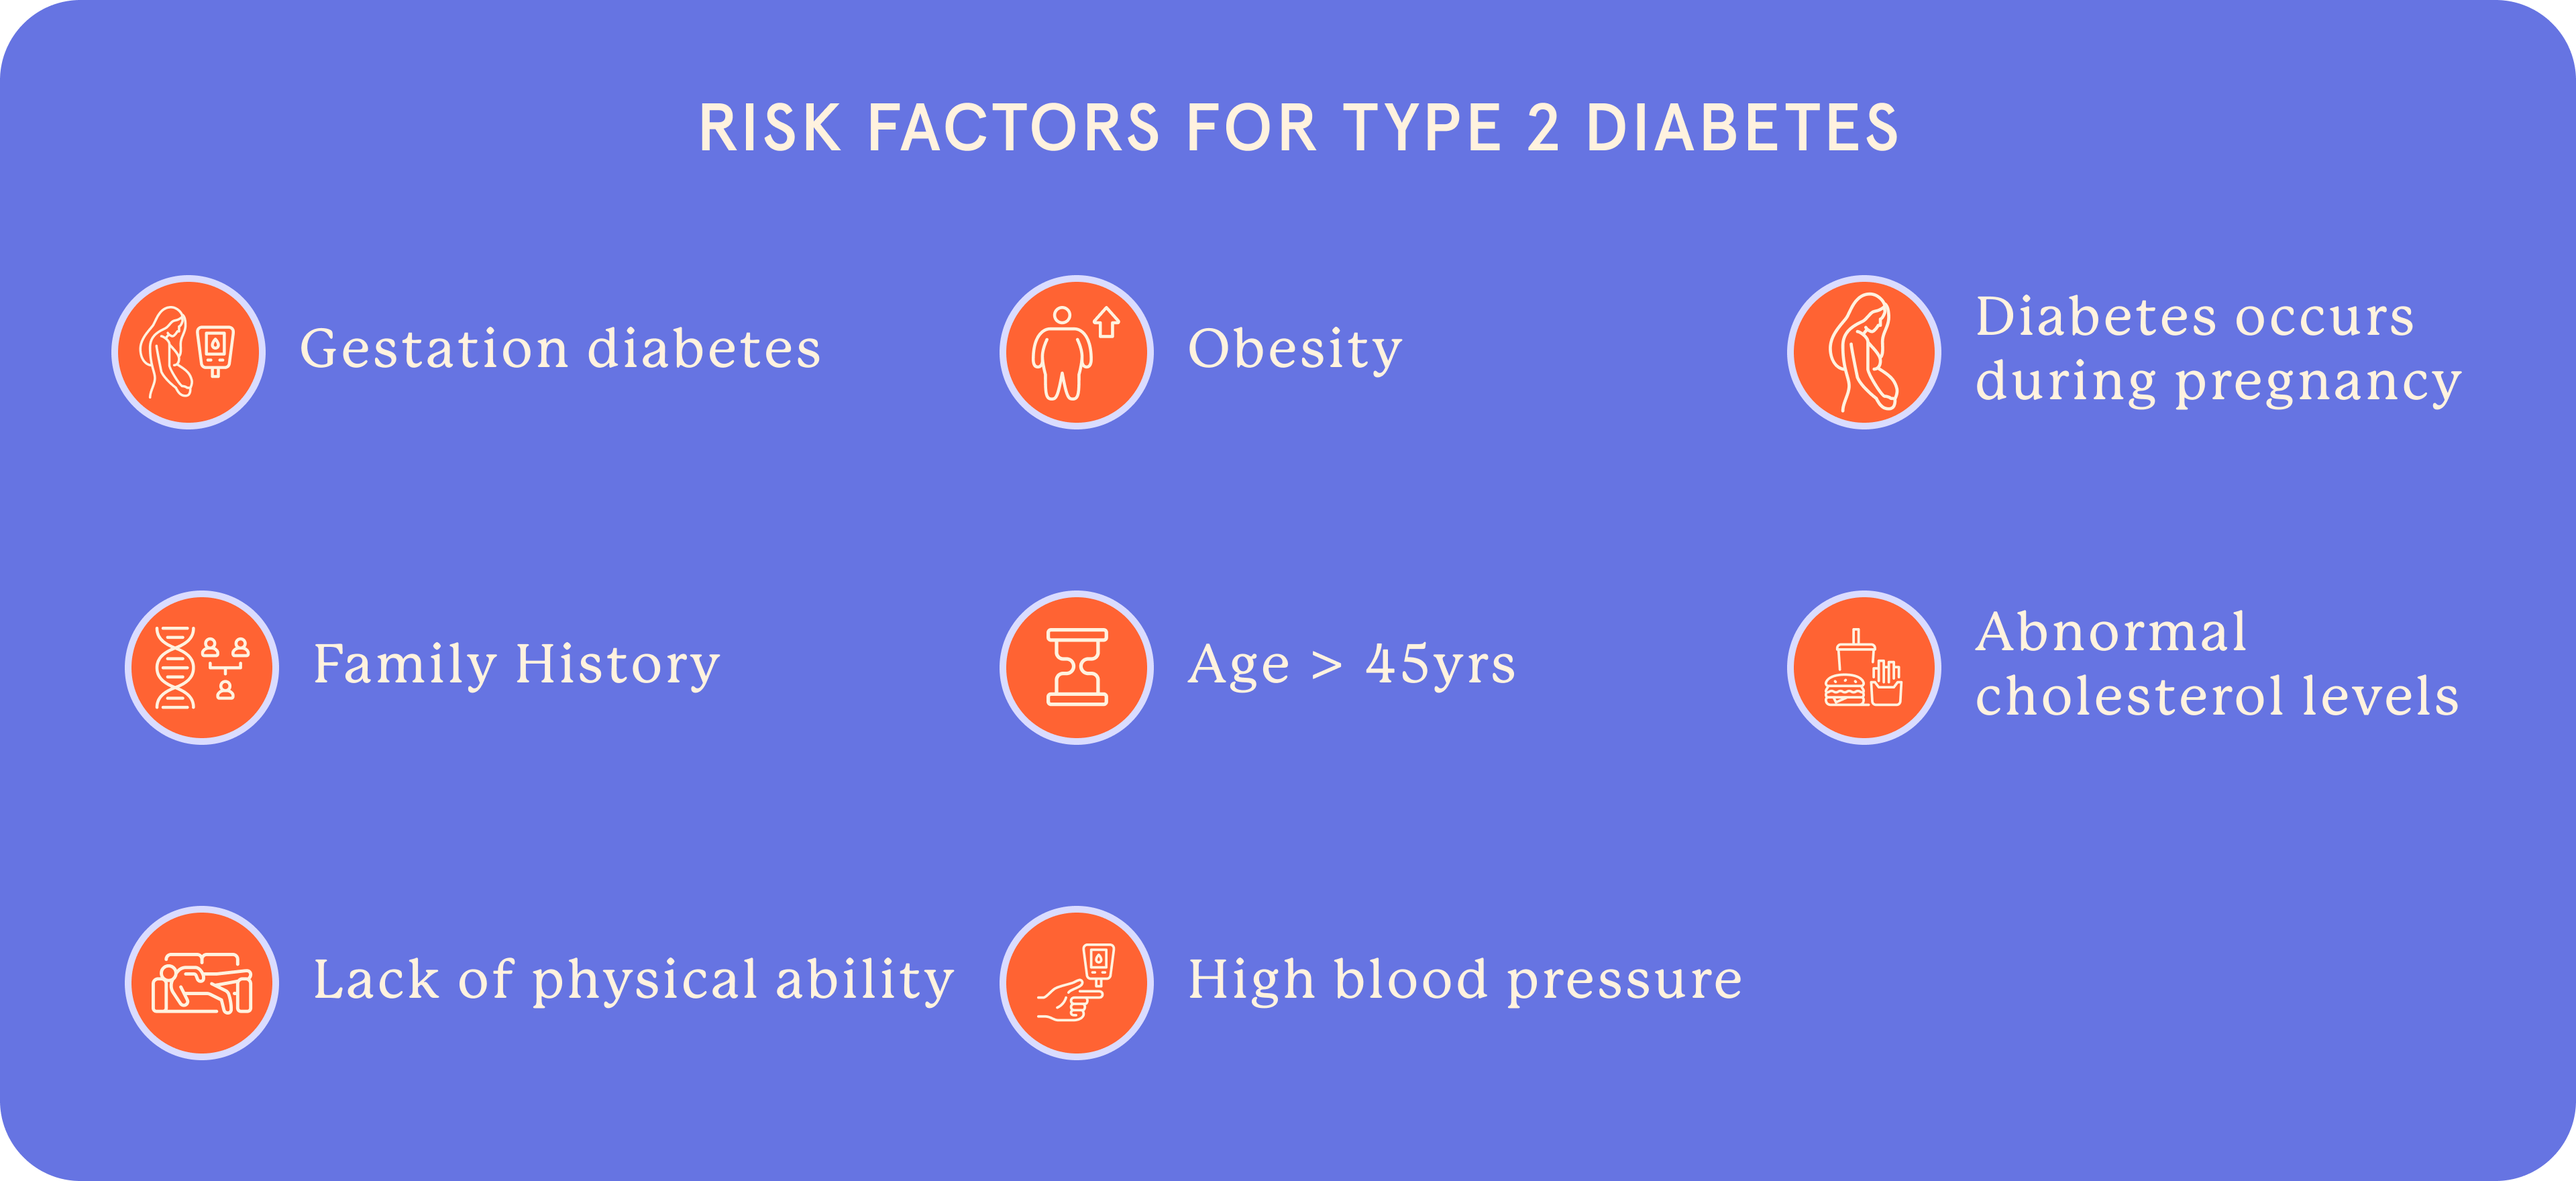 Risk factors contributing to the development of Type 2 Diabetes